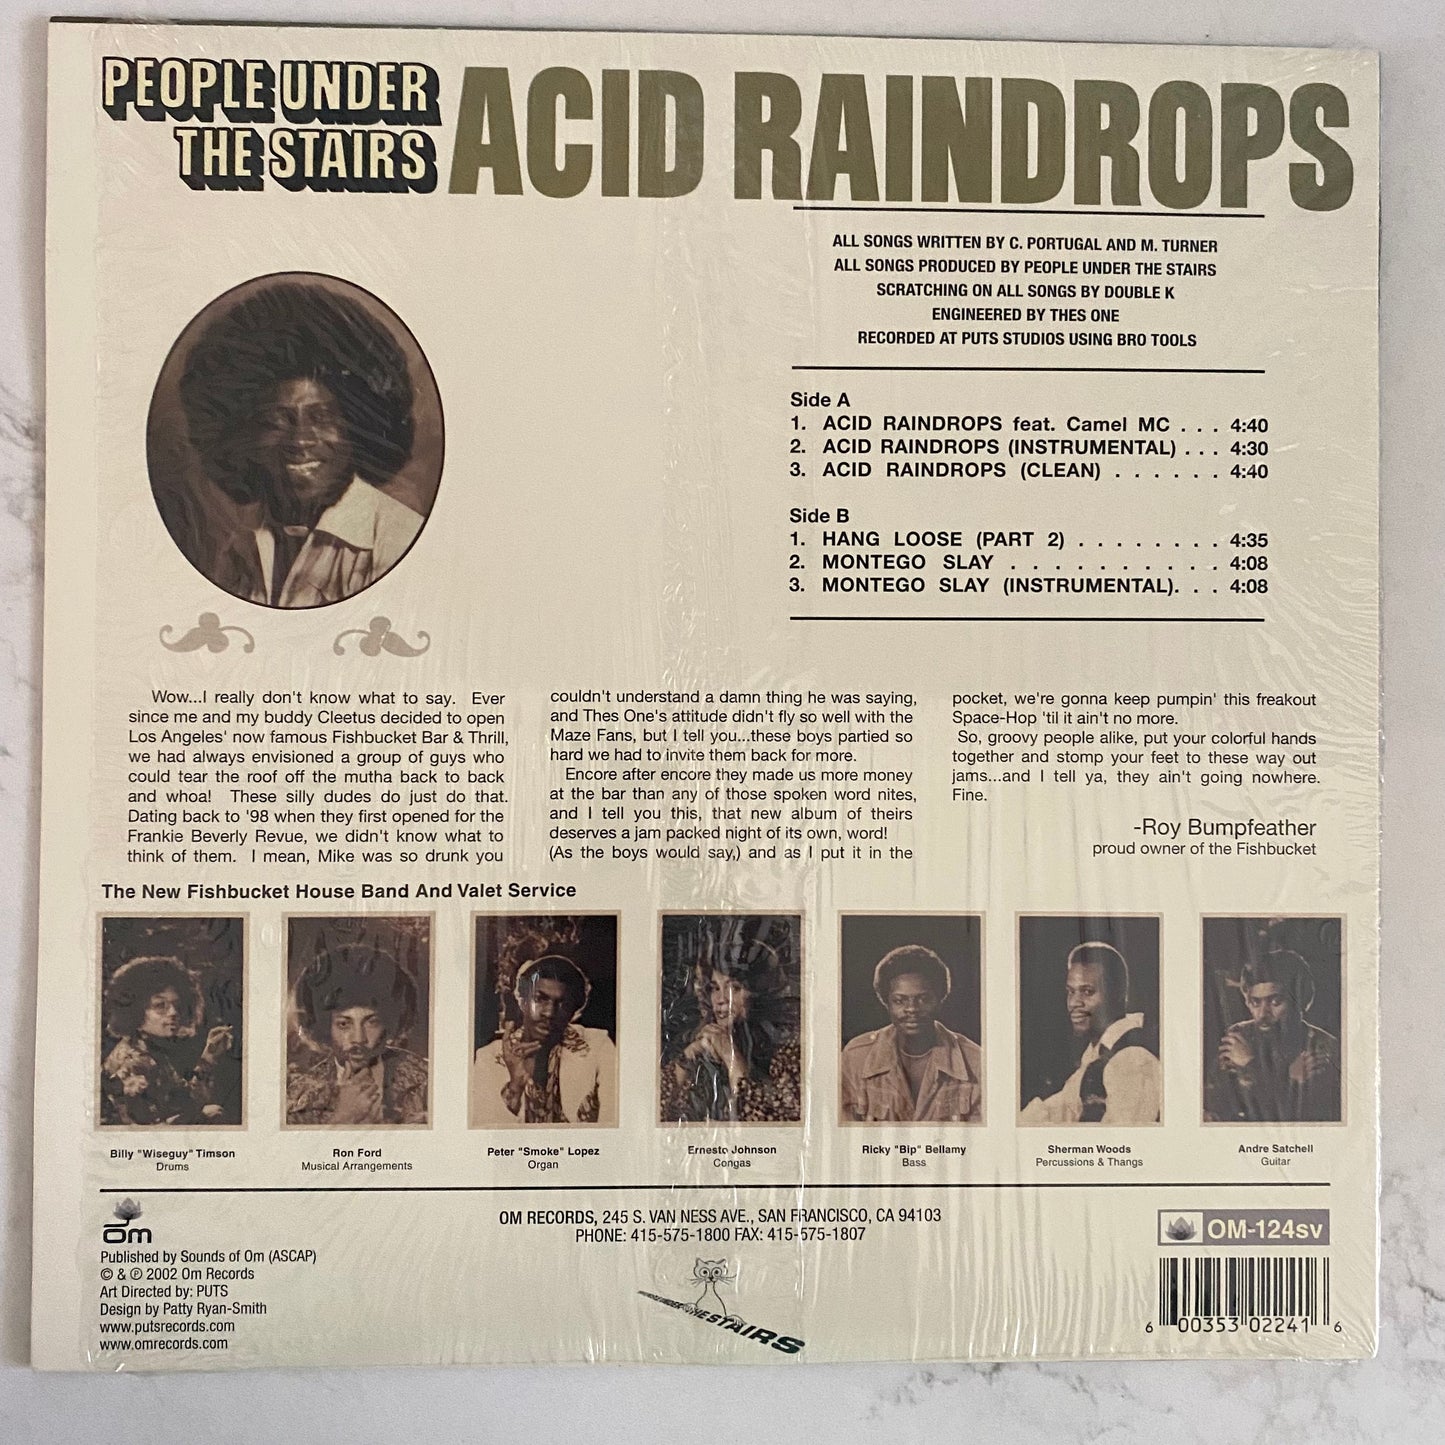 People Under The Stairs - Acid Raindrops (12"). HIP-HOP